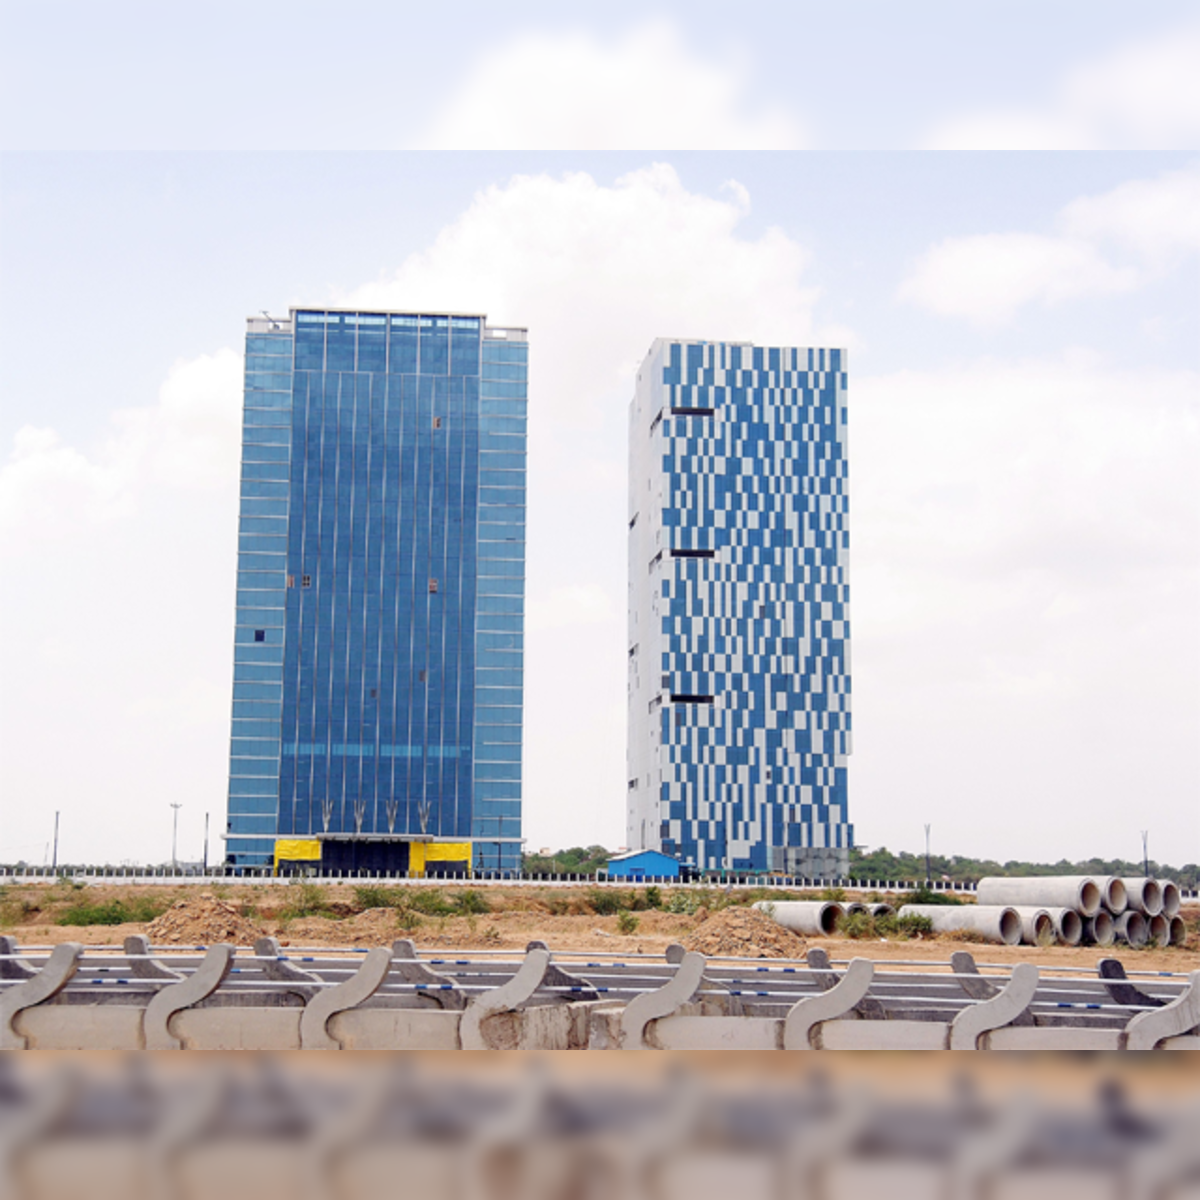 GIFT City Among Top Three Emerging Business Hubs in the World